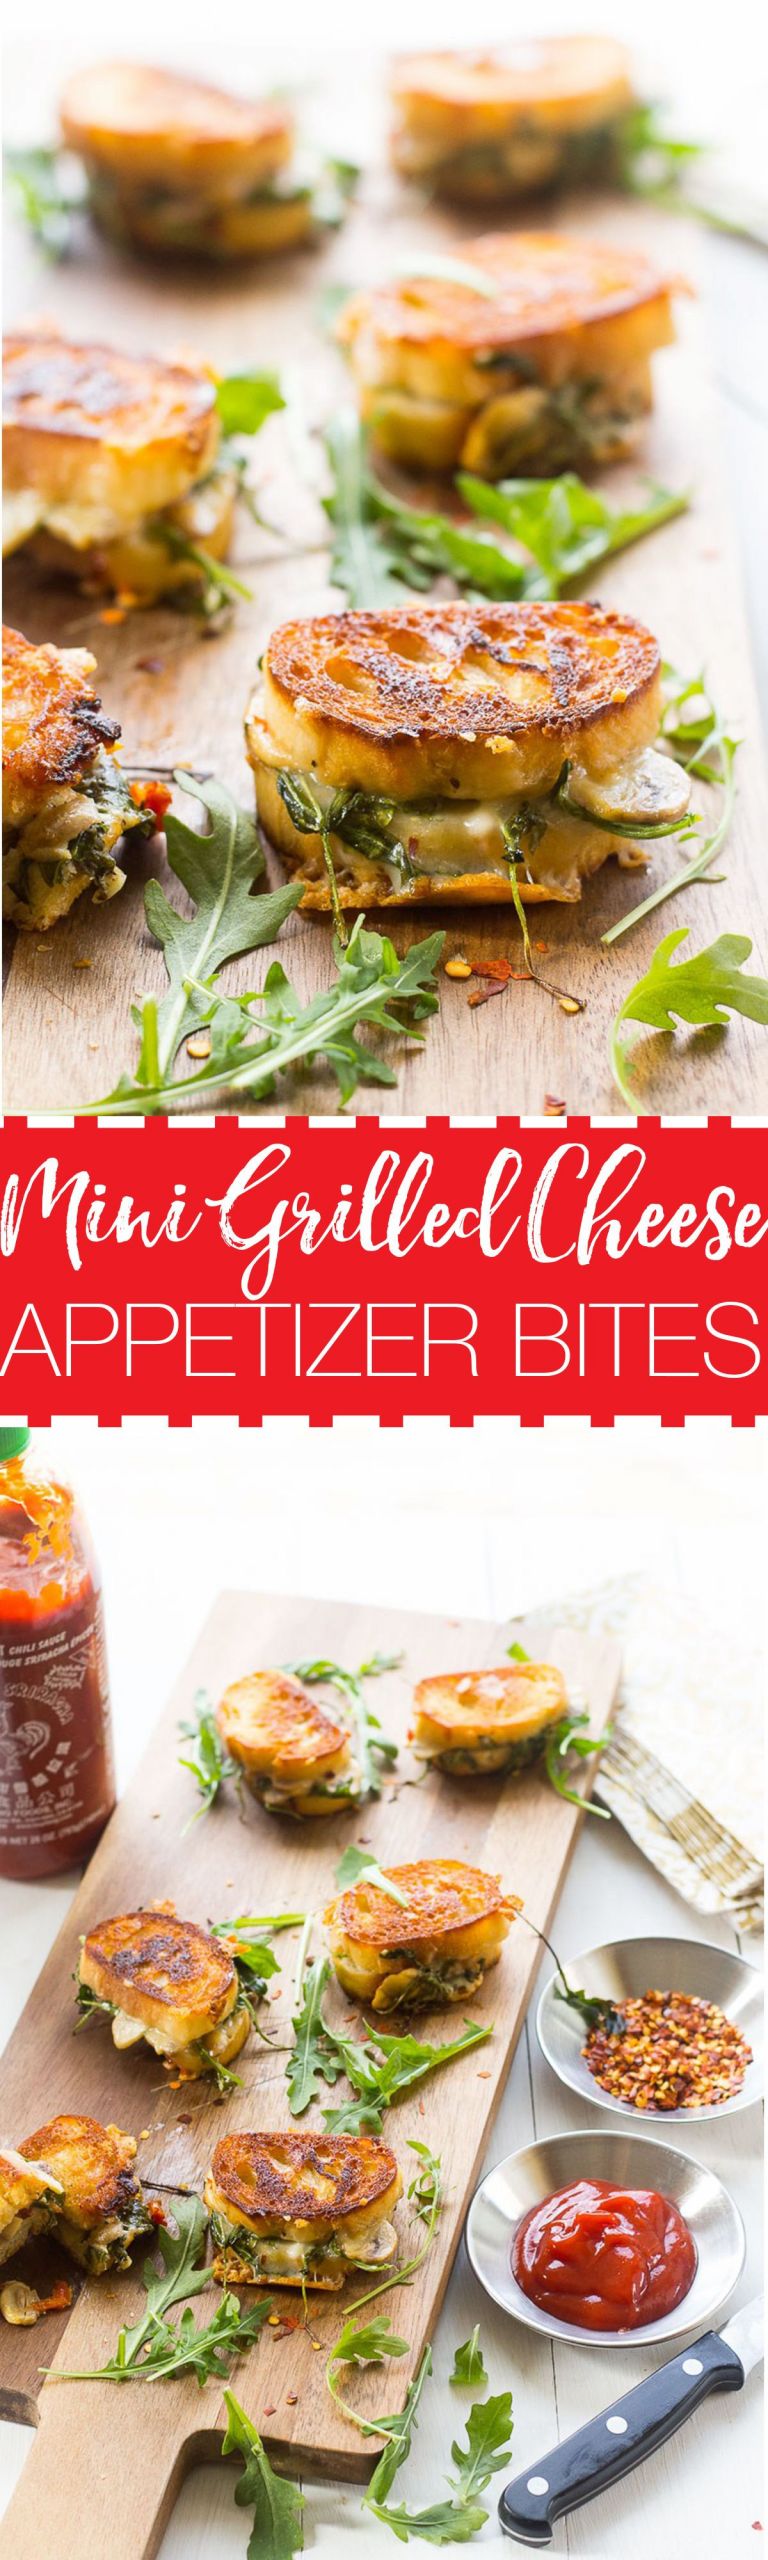 Grilled Cheese Appetizers
 These Mini Grilled Cheese Sandwich Appetizers made with